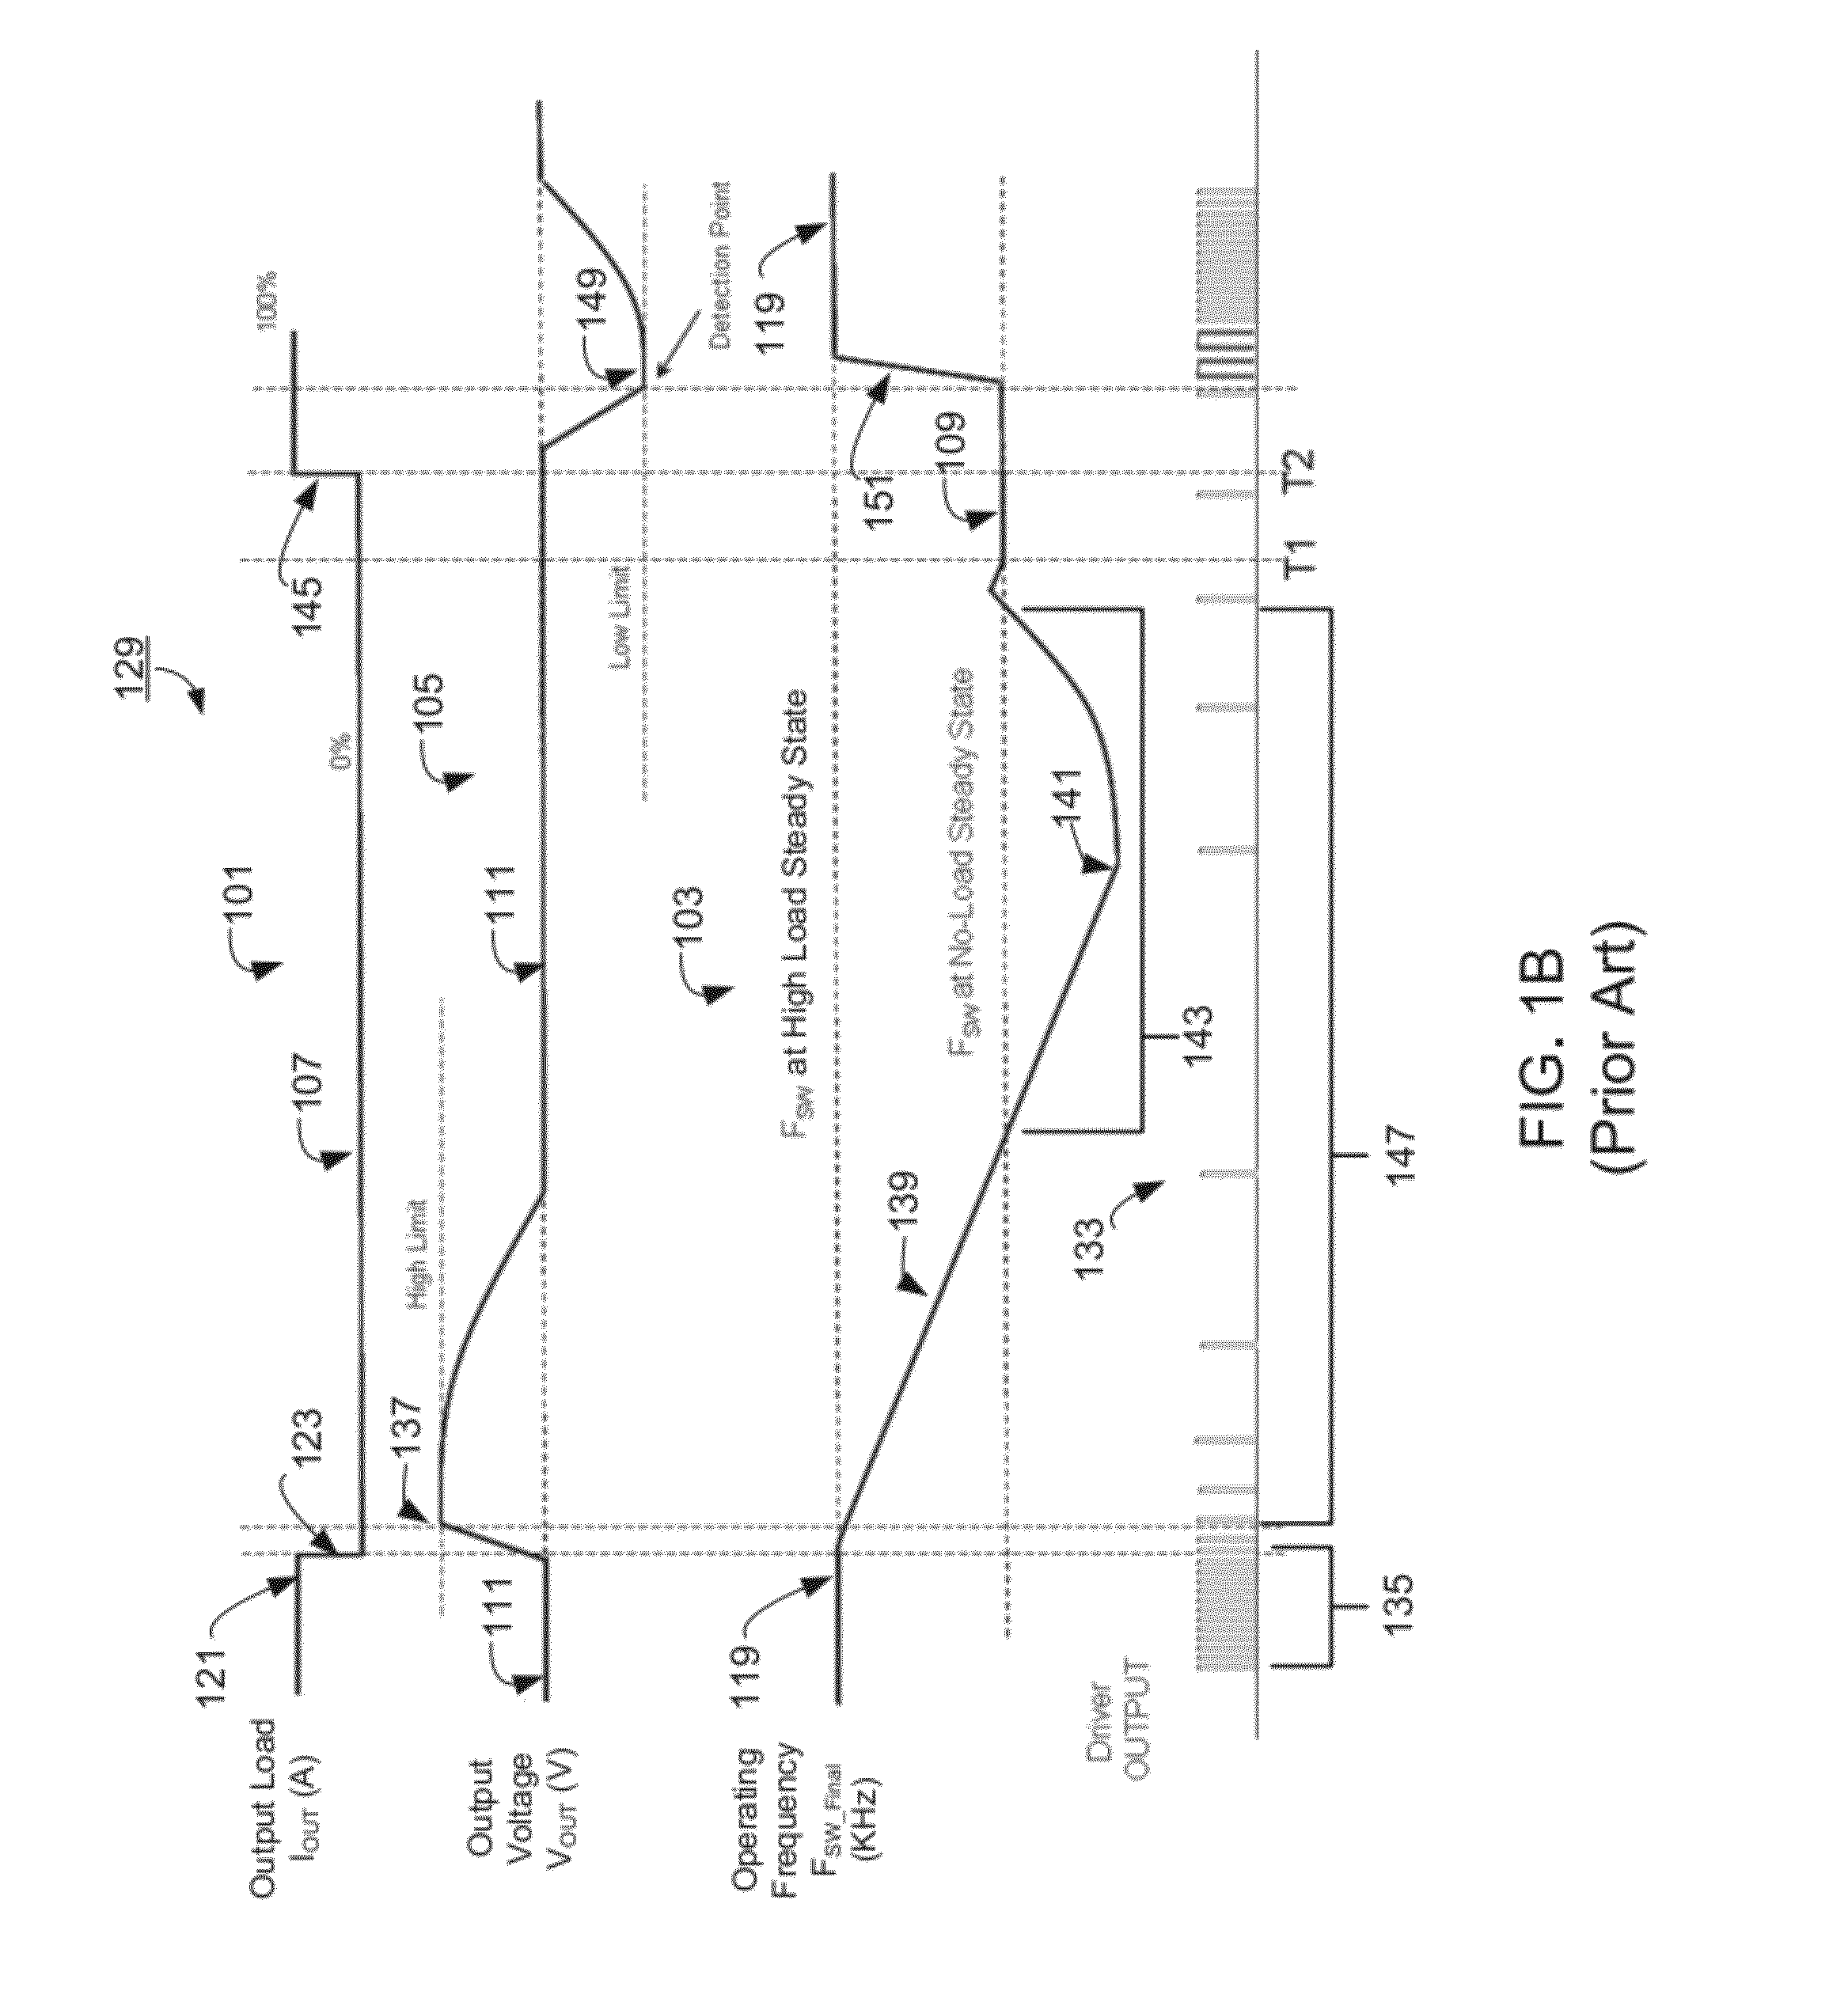 Switching Power Converter Having Optimal Dynamic Load Response with Ultra-Low No Load Power Consumption